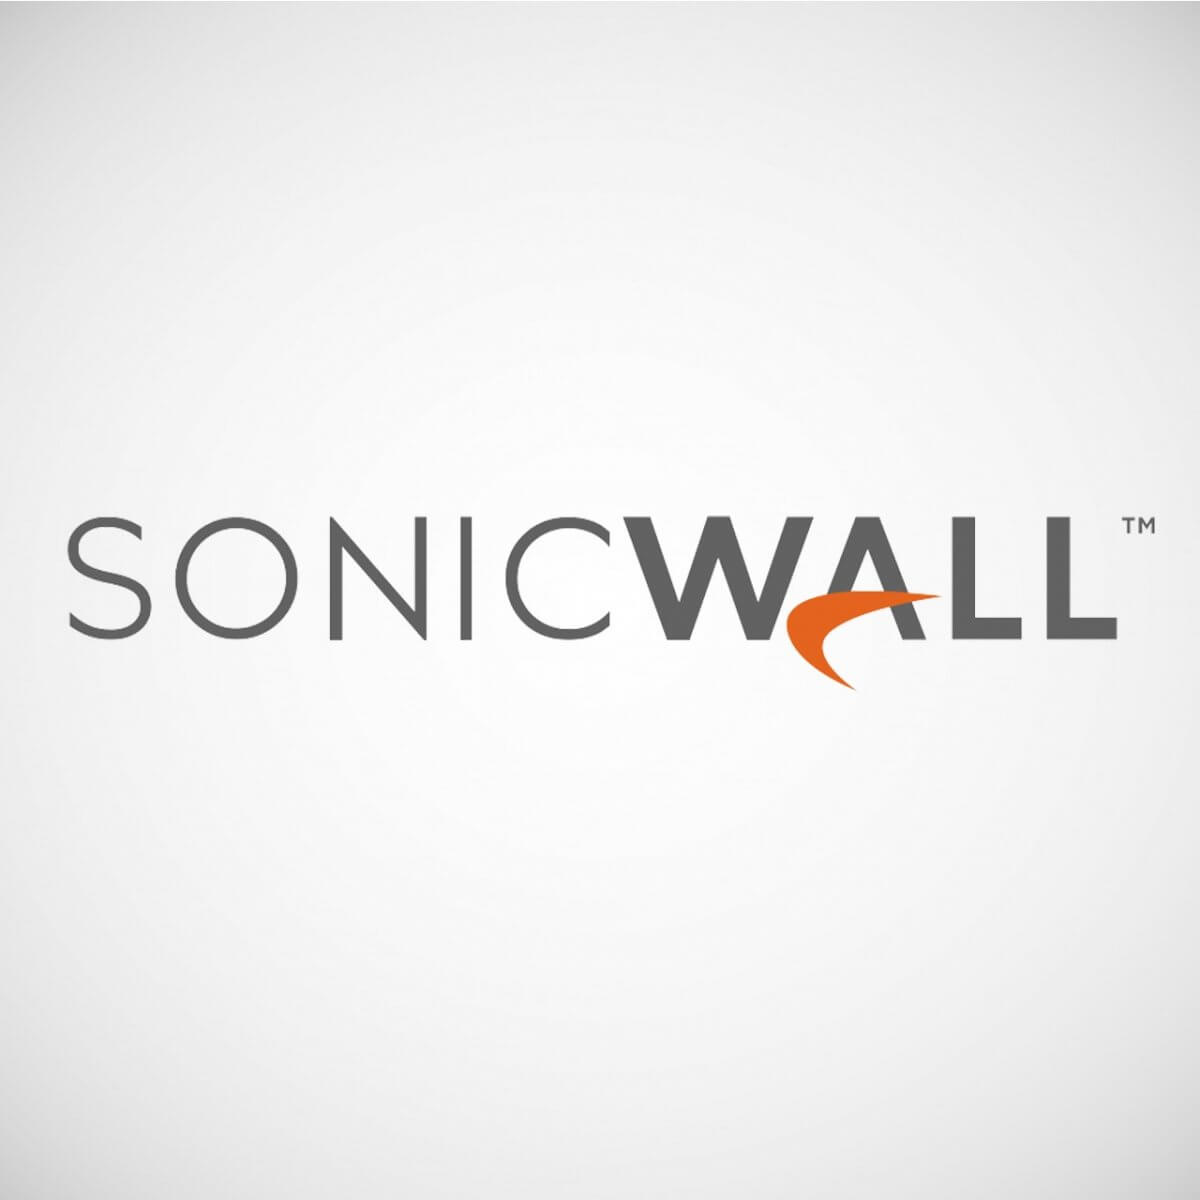 ip configuration for sonicwall mobile connect mac